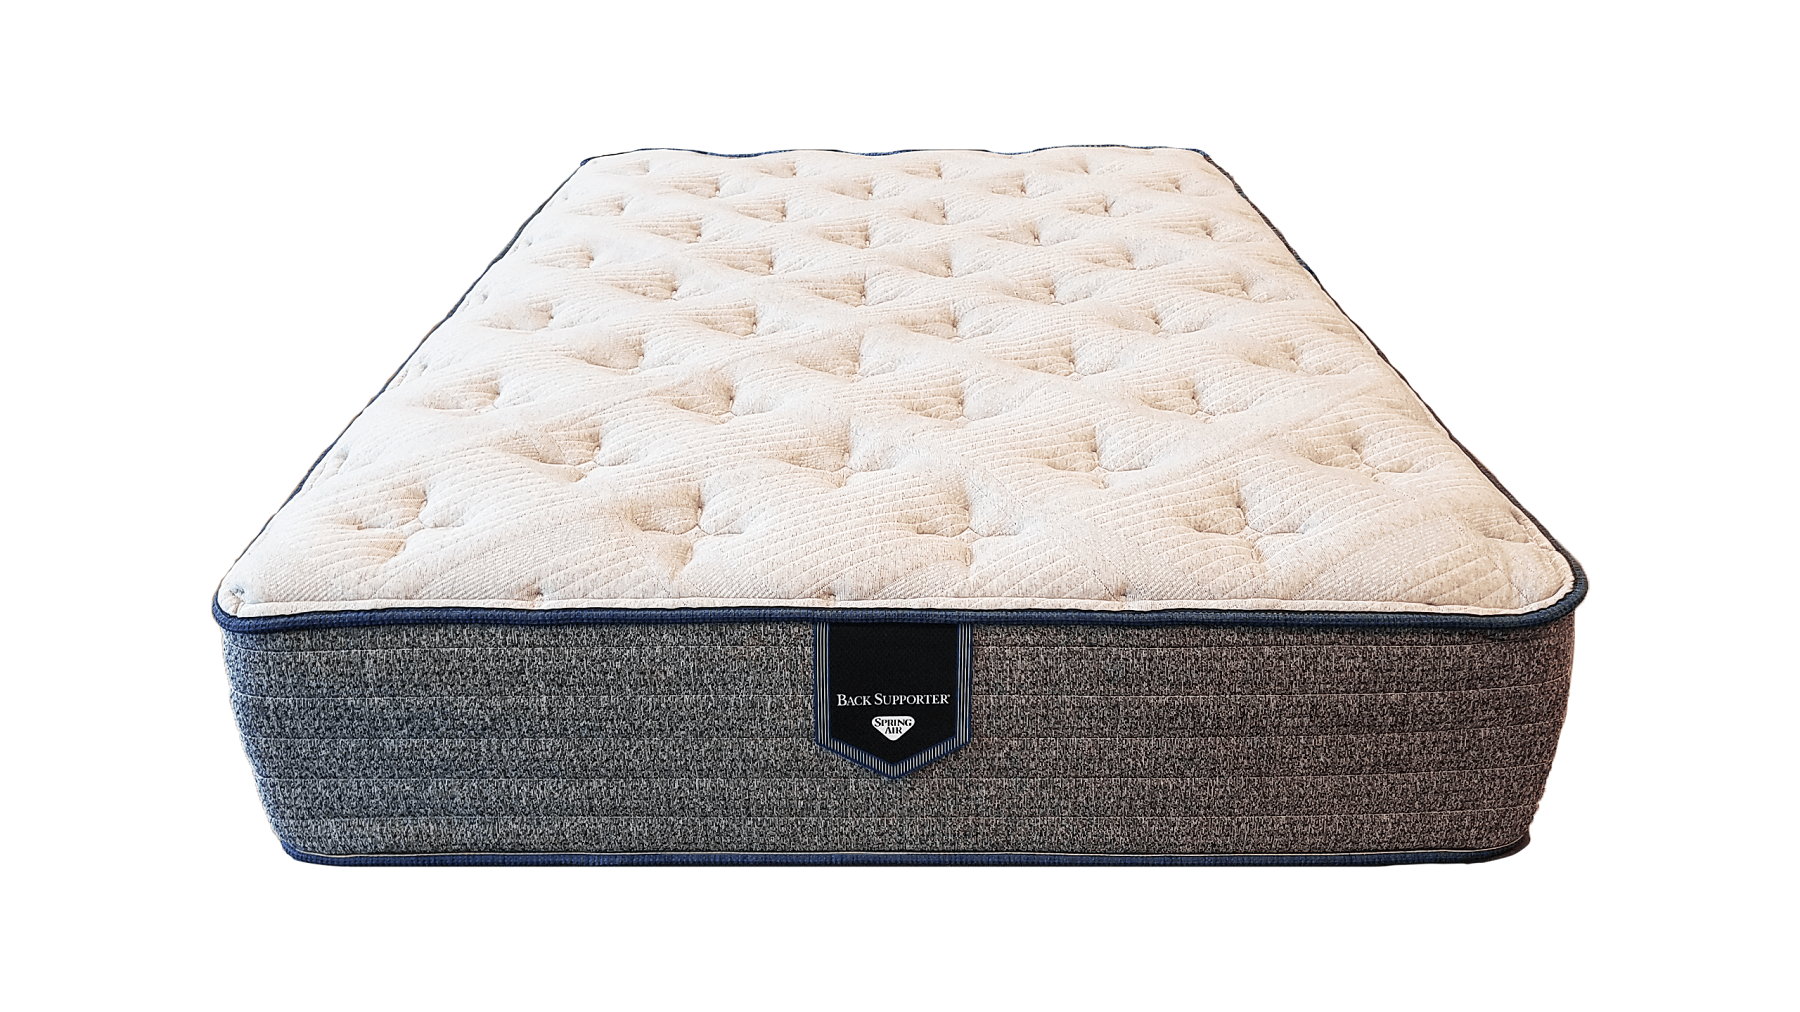 spring air back supporter mattress for sale